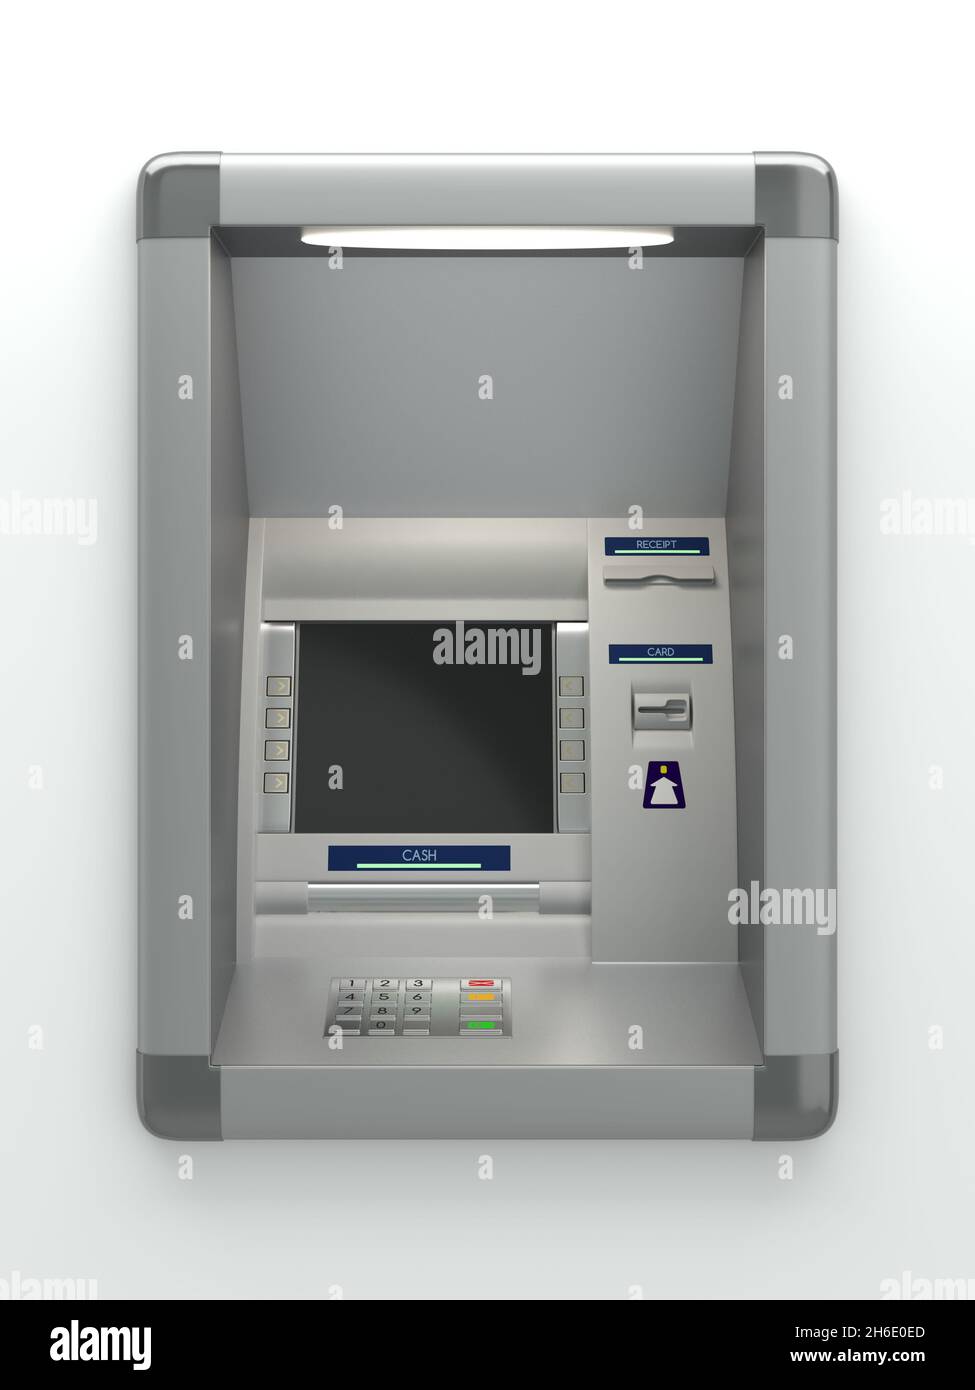 Atm machine with a card reader. Display screen, buttons, cash dispenser, receipt printer. Pin code safety, automatic banking, electronic cash withdraw Stock Photo